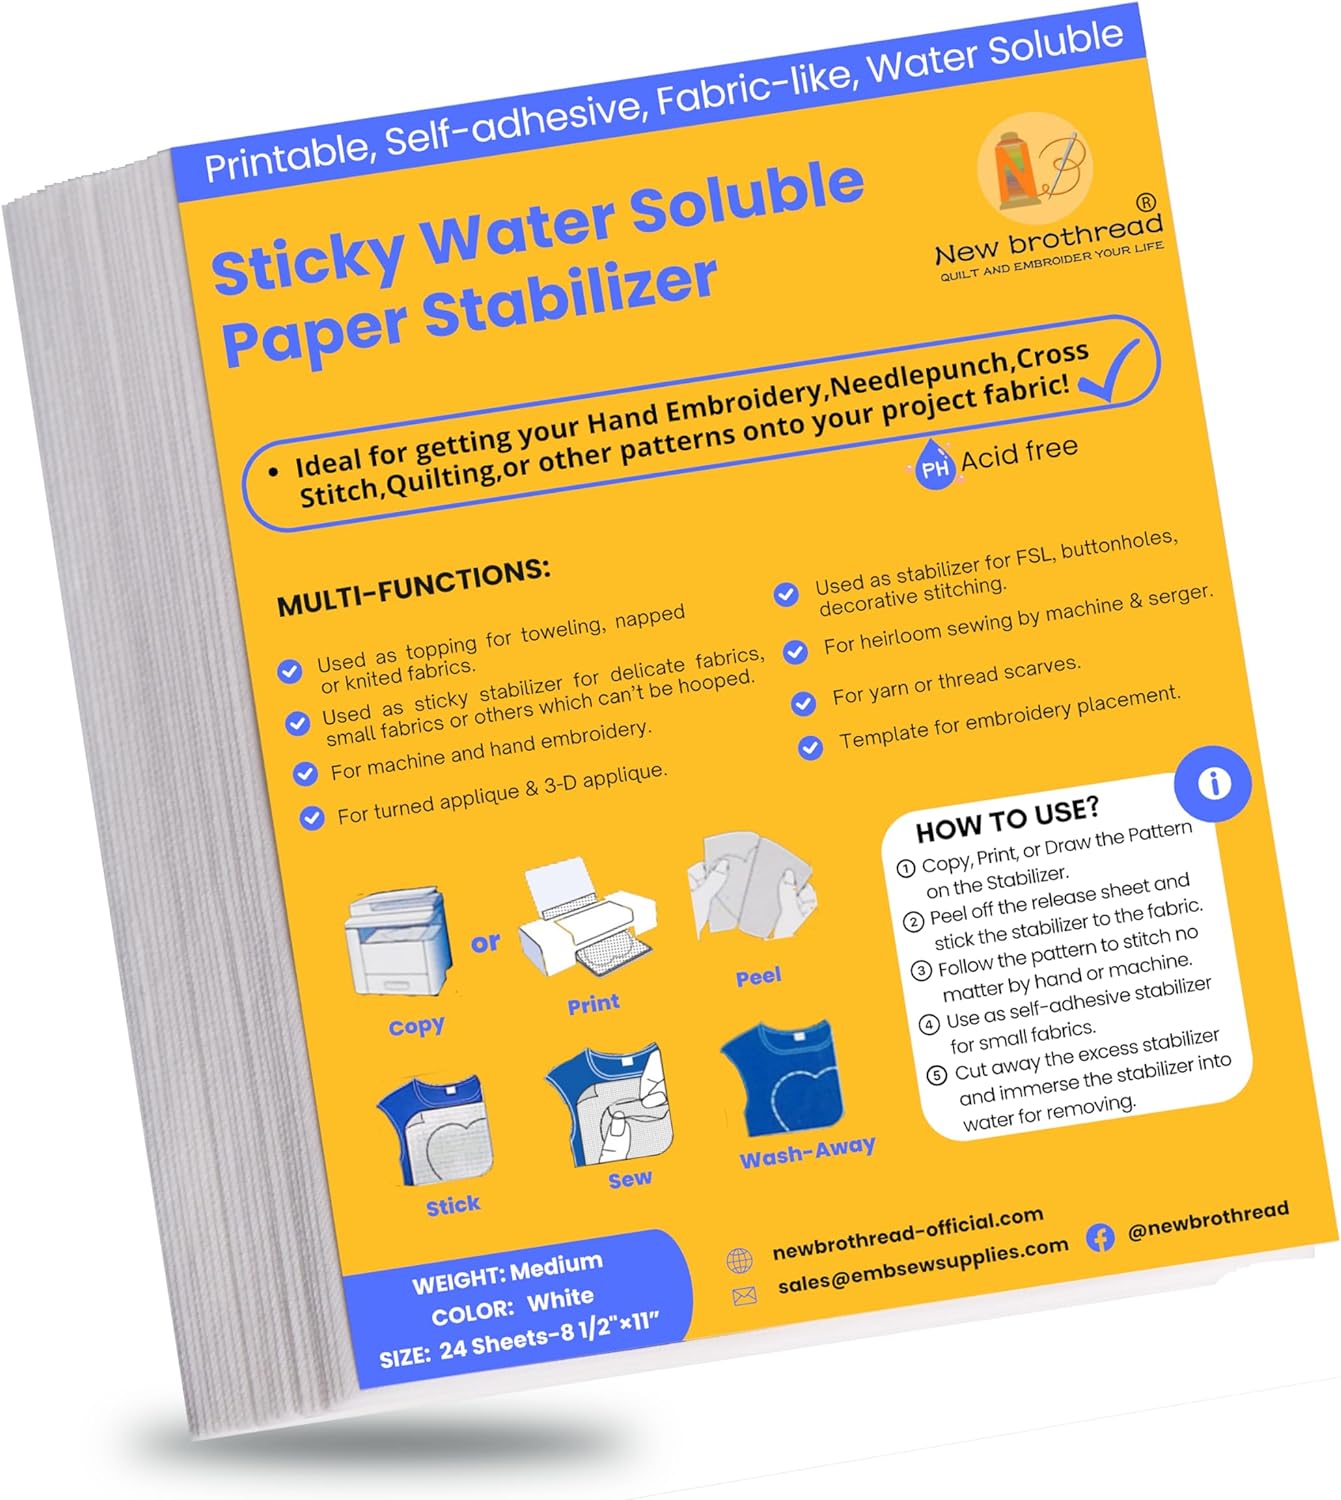 New brothread 8.5"x11" Sticky Water Soluble Embroidery Stabilizer Printable Paper Stabilizer - Medium Weight - Allowed for Print or Draw Patterns Best for Hand & Machine Embroidery